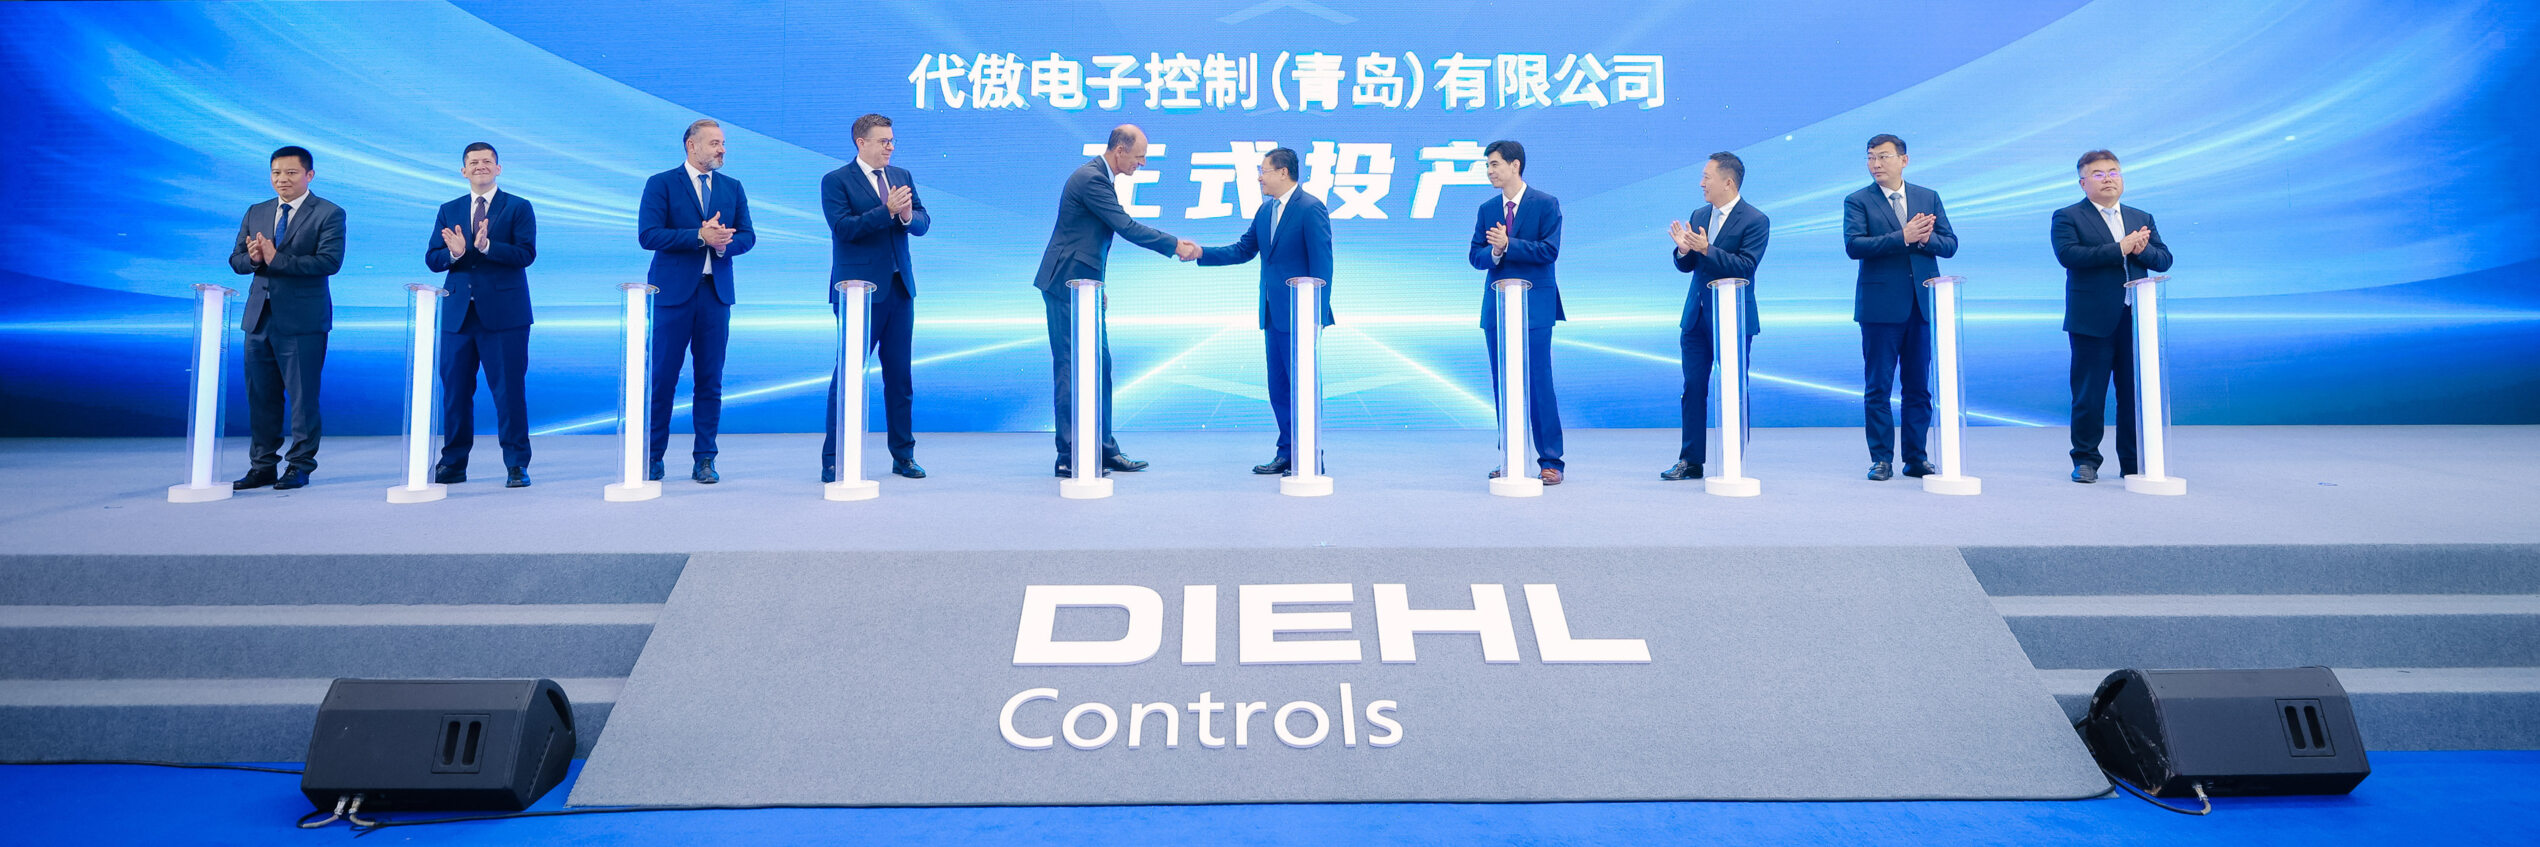 Diehl Controls opens new plant in China 